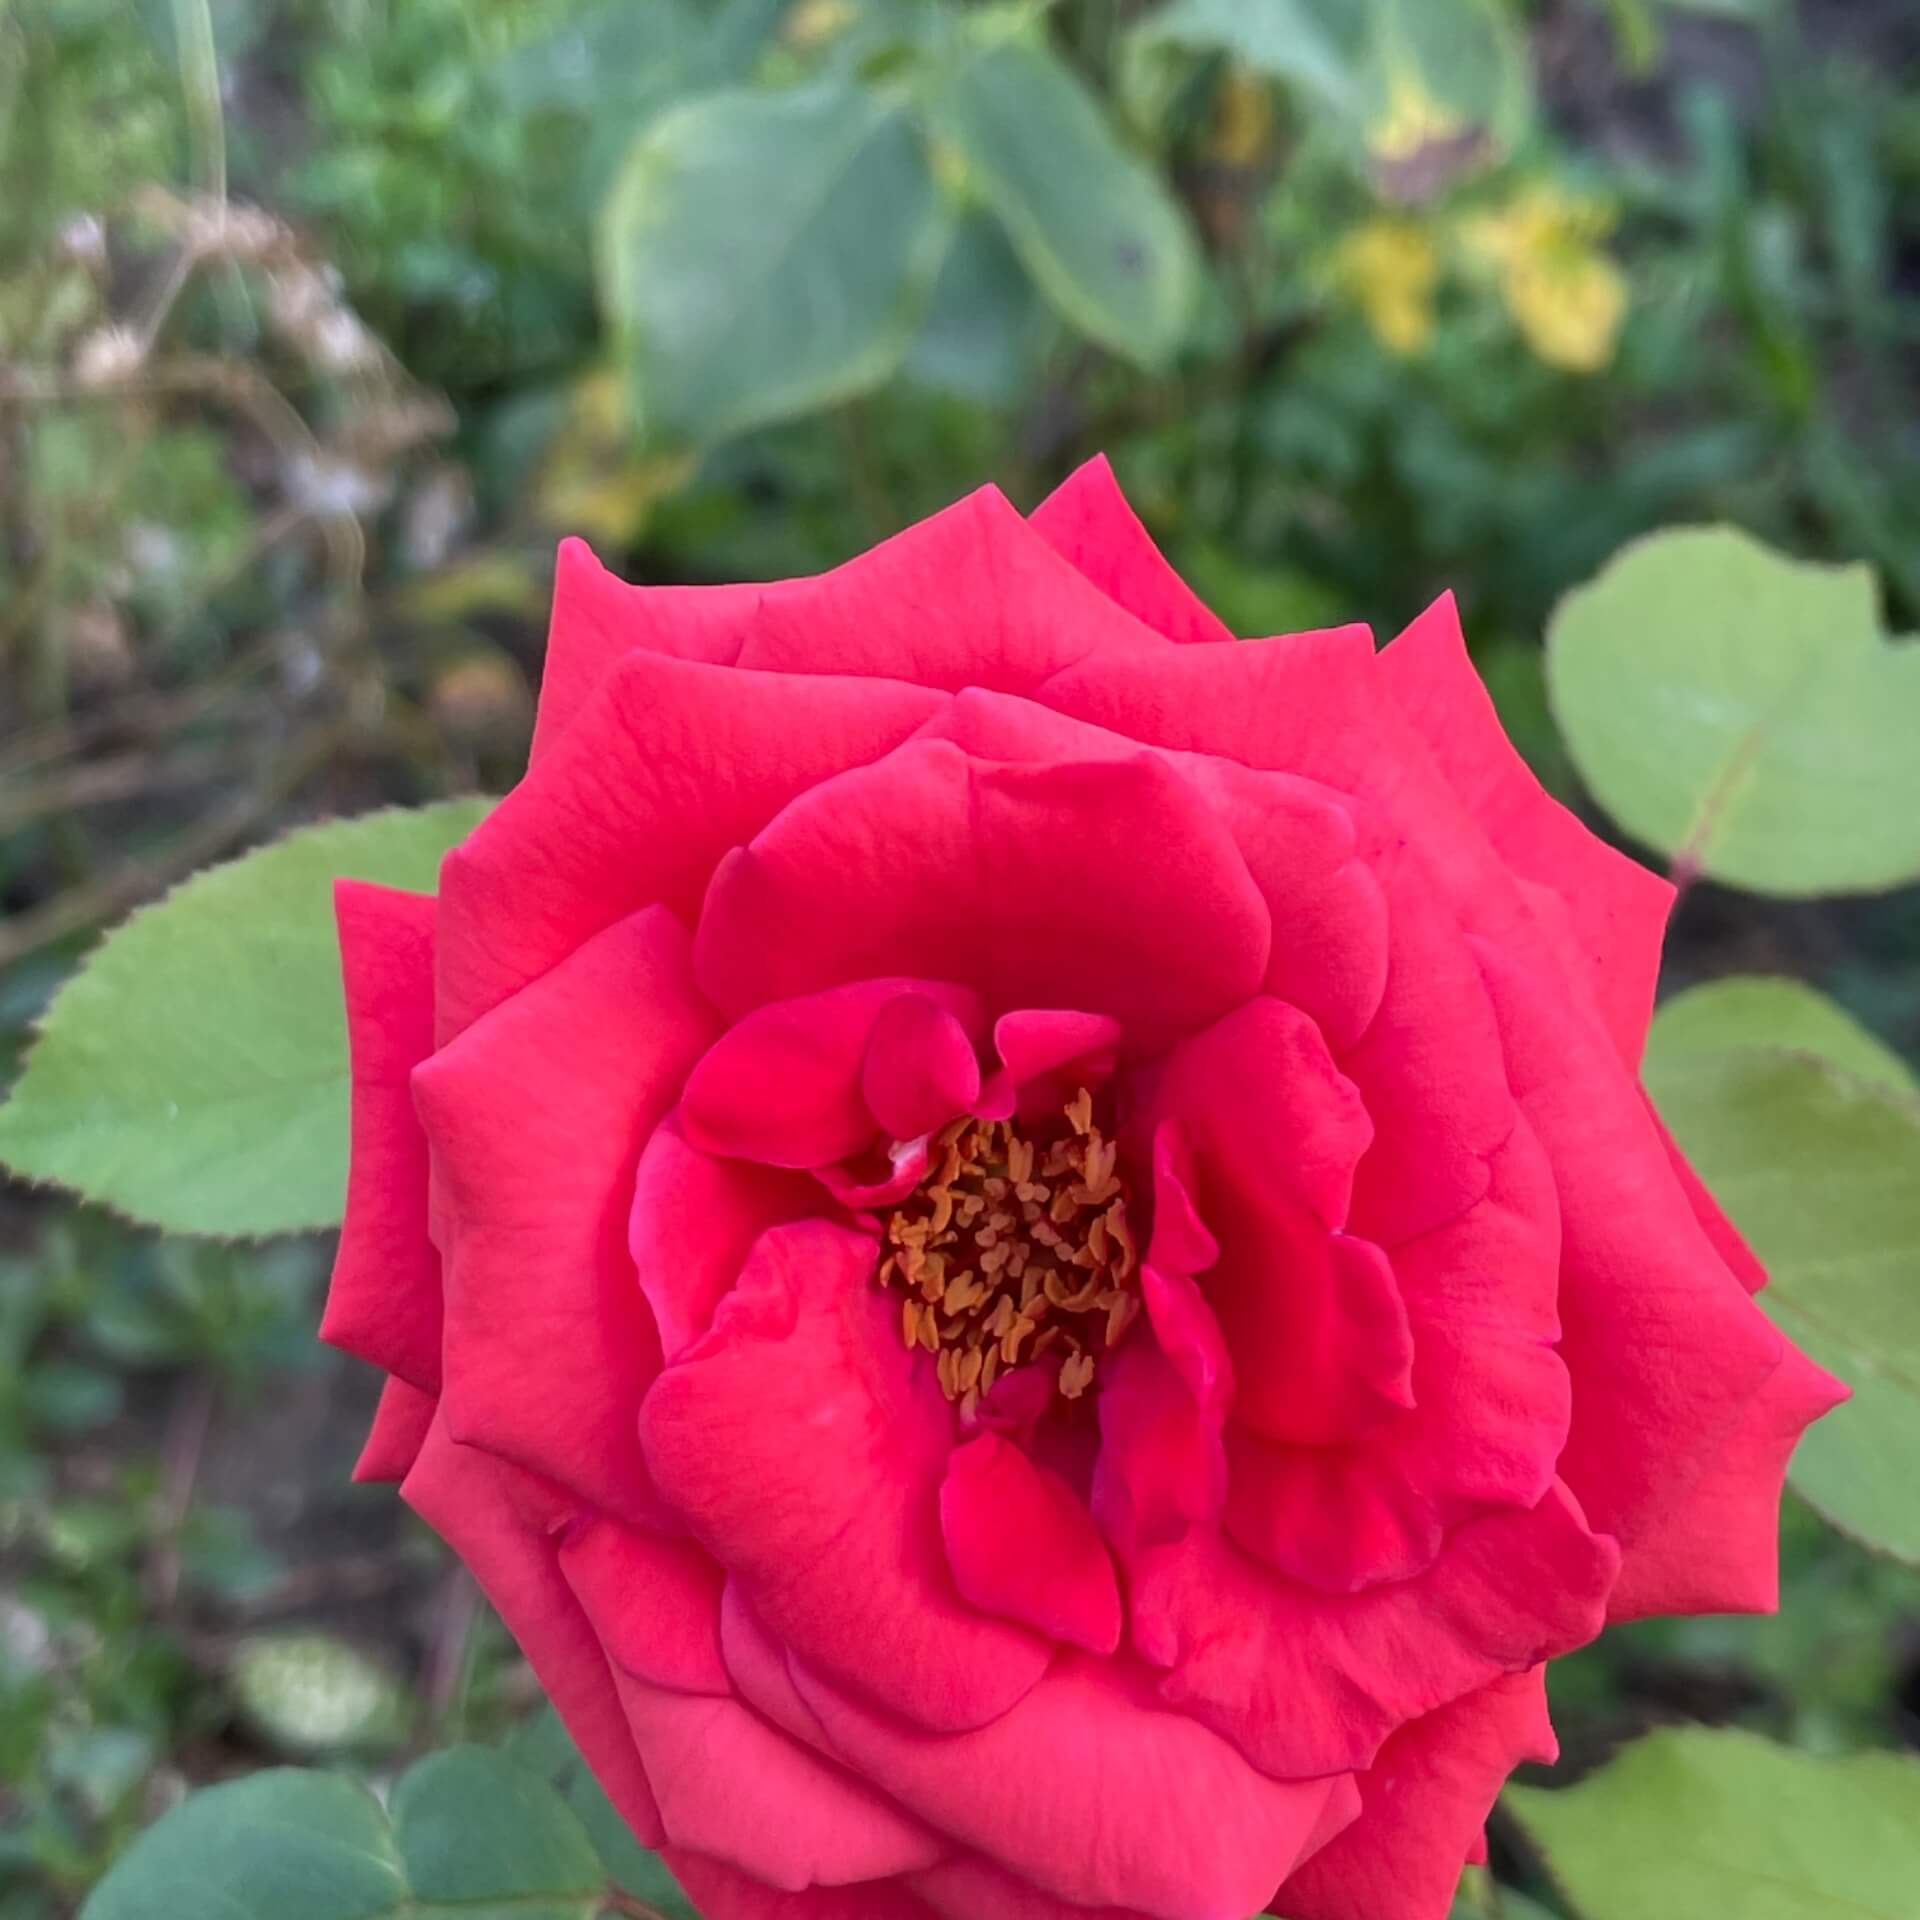 Edelrose 'Roter Stern' (Rosa 'Roter Stern')